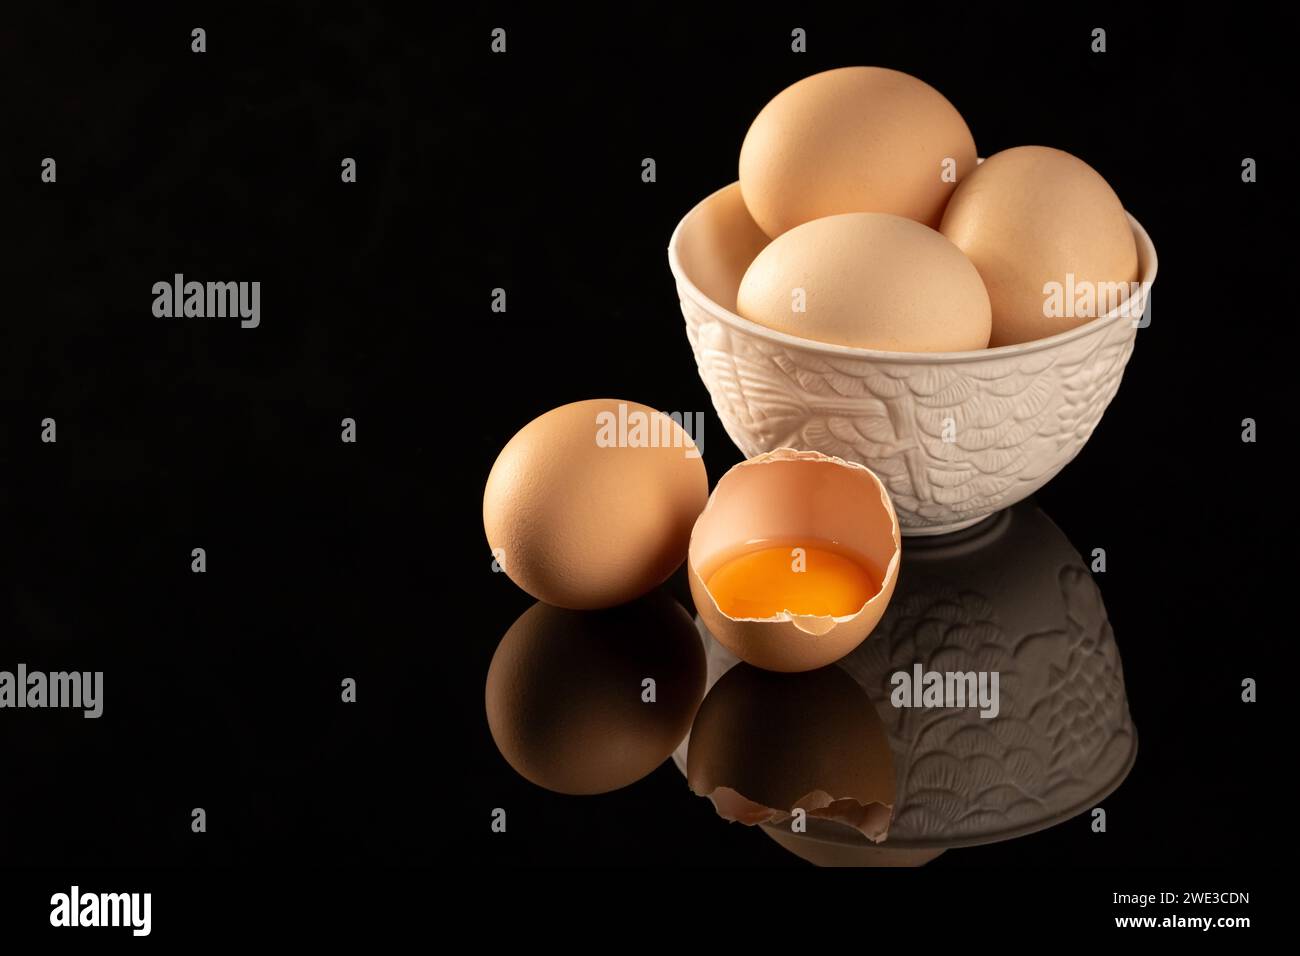 A group of raw, uncooked brown chicken eggs are neatly arranged on a shiny, black reflective surface, creating an ideal setup for engaging food photog Stock Photo